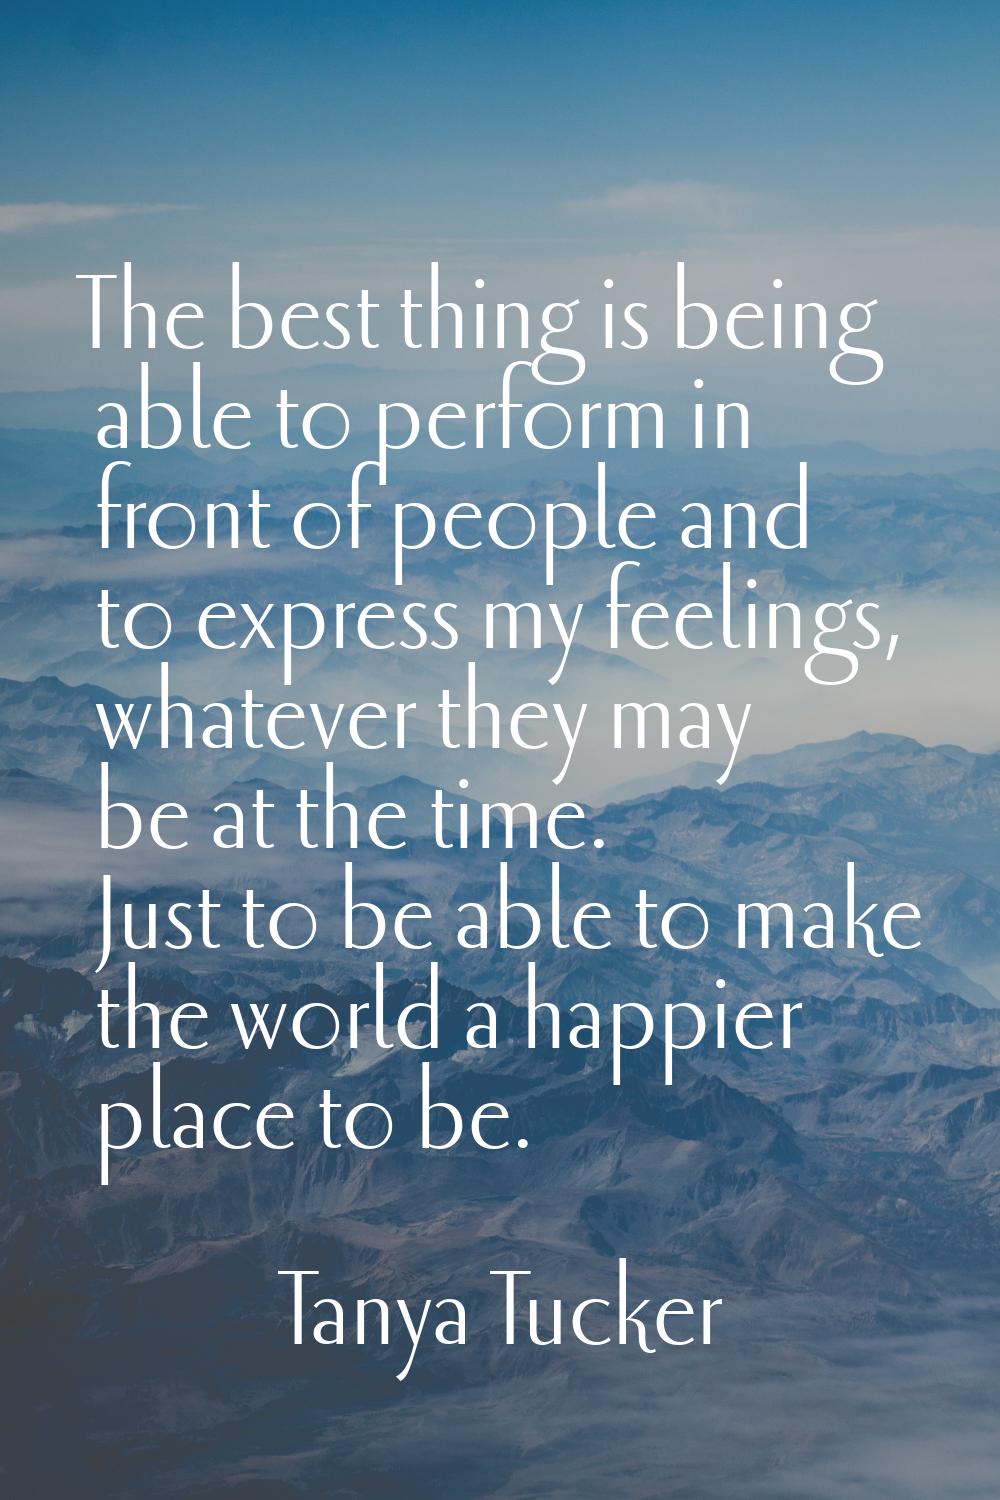 The best thing is being able to perform in front of people and to express my feelings, whatever the